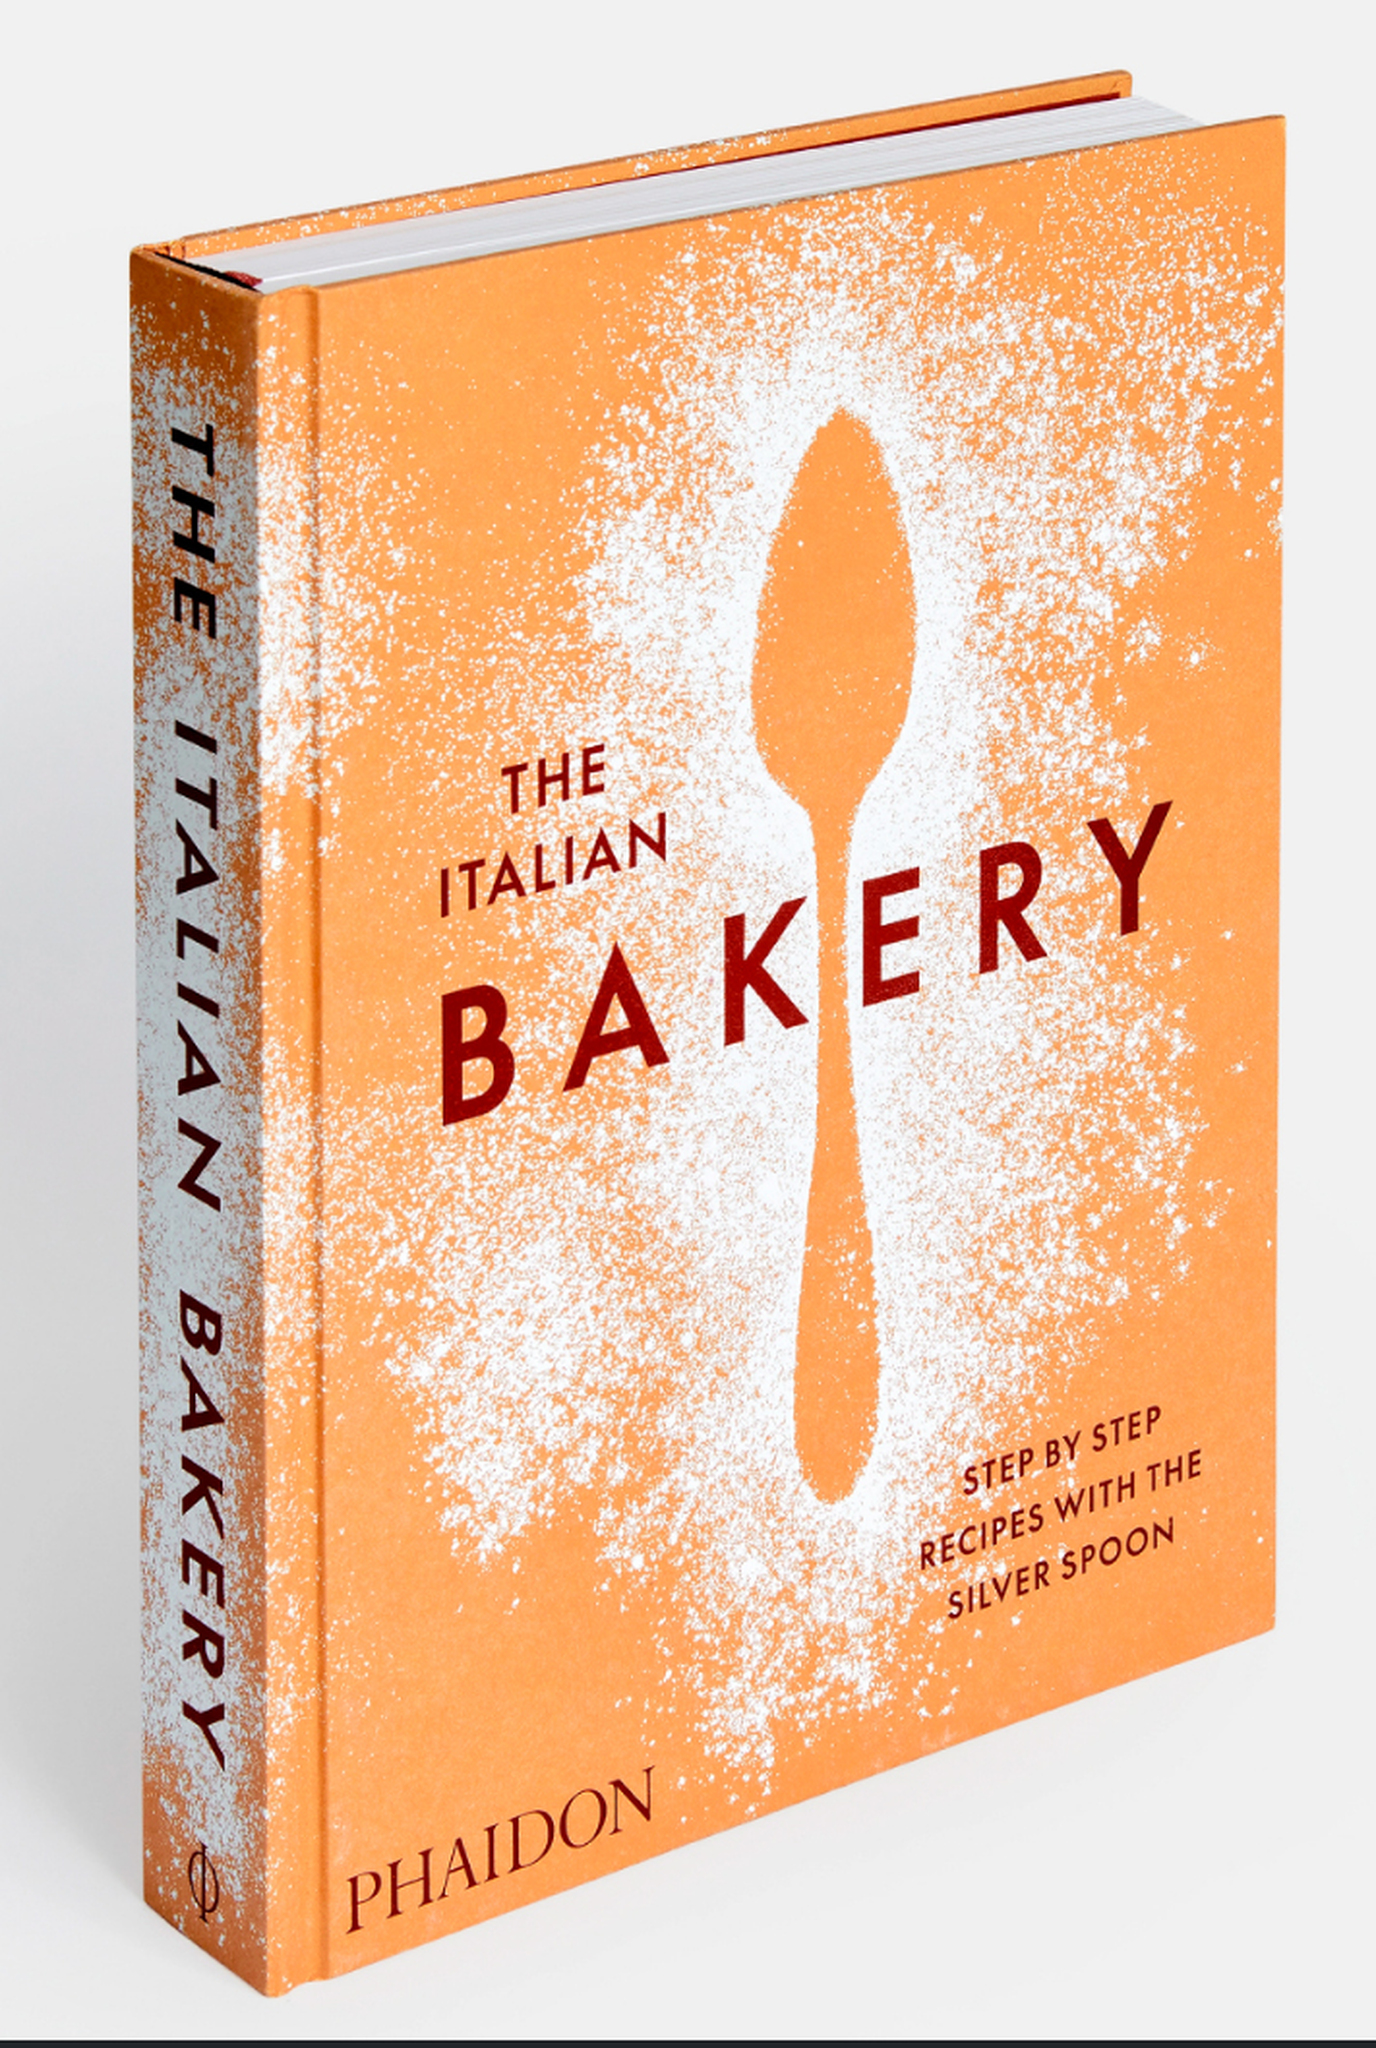 Carte The Italian bakery step-by-step recipes with the Silver Spoon